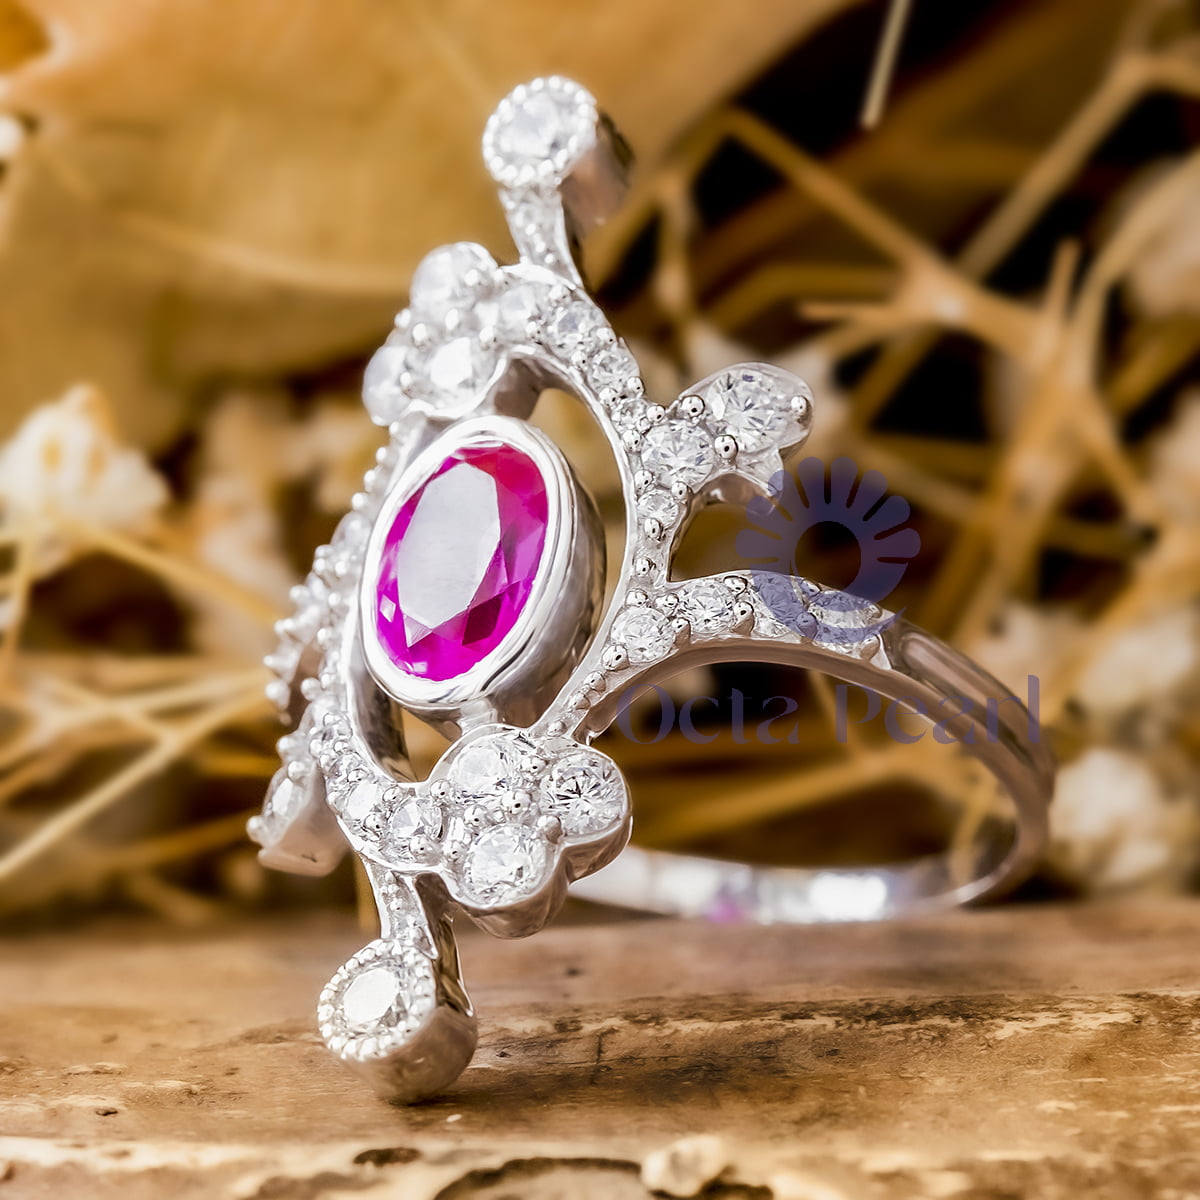 Pink Vintage-Style Nouveau Ring For Women